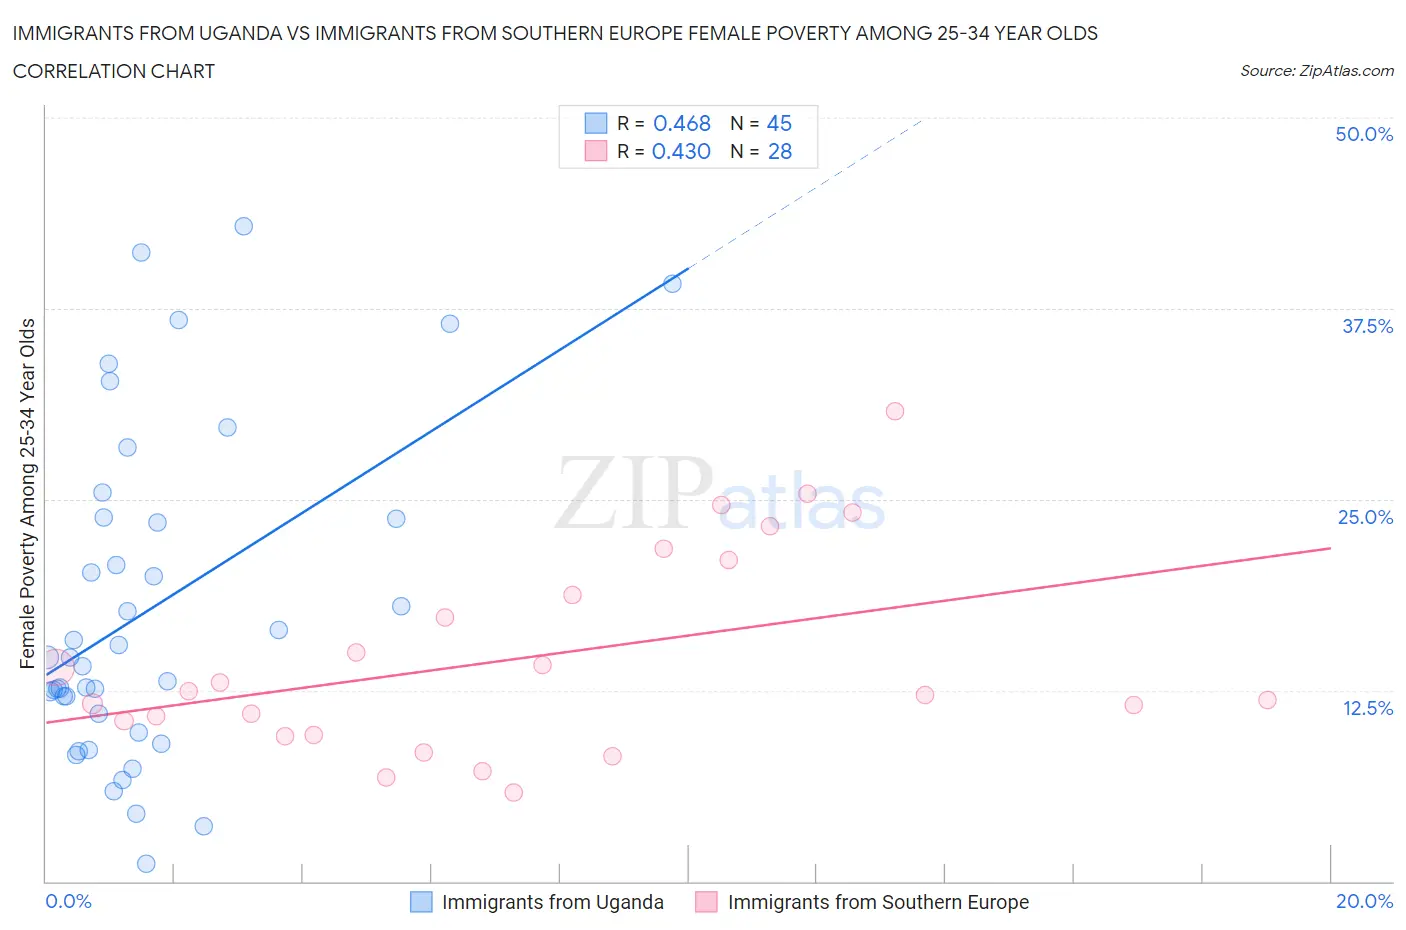 Immigrants from Uganda vs Immigrants from Southern Europe Female Poverty Among 25-34 Year Olds